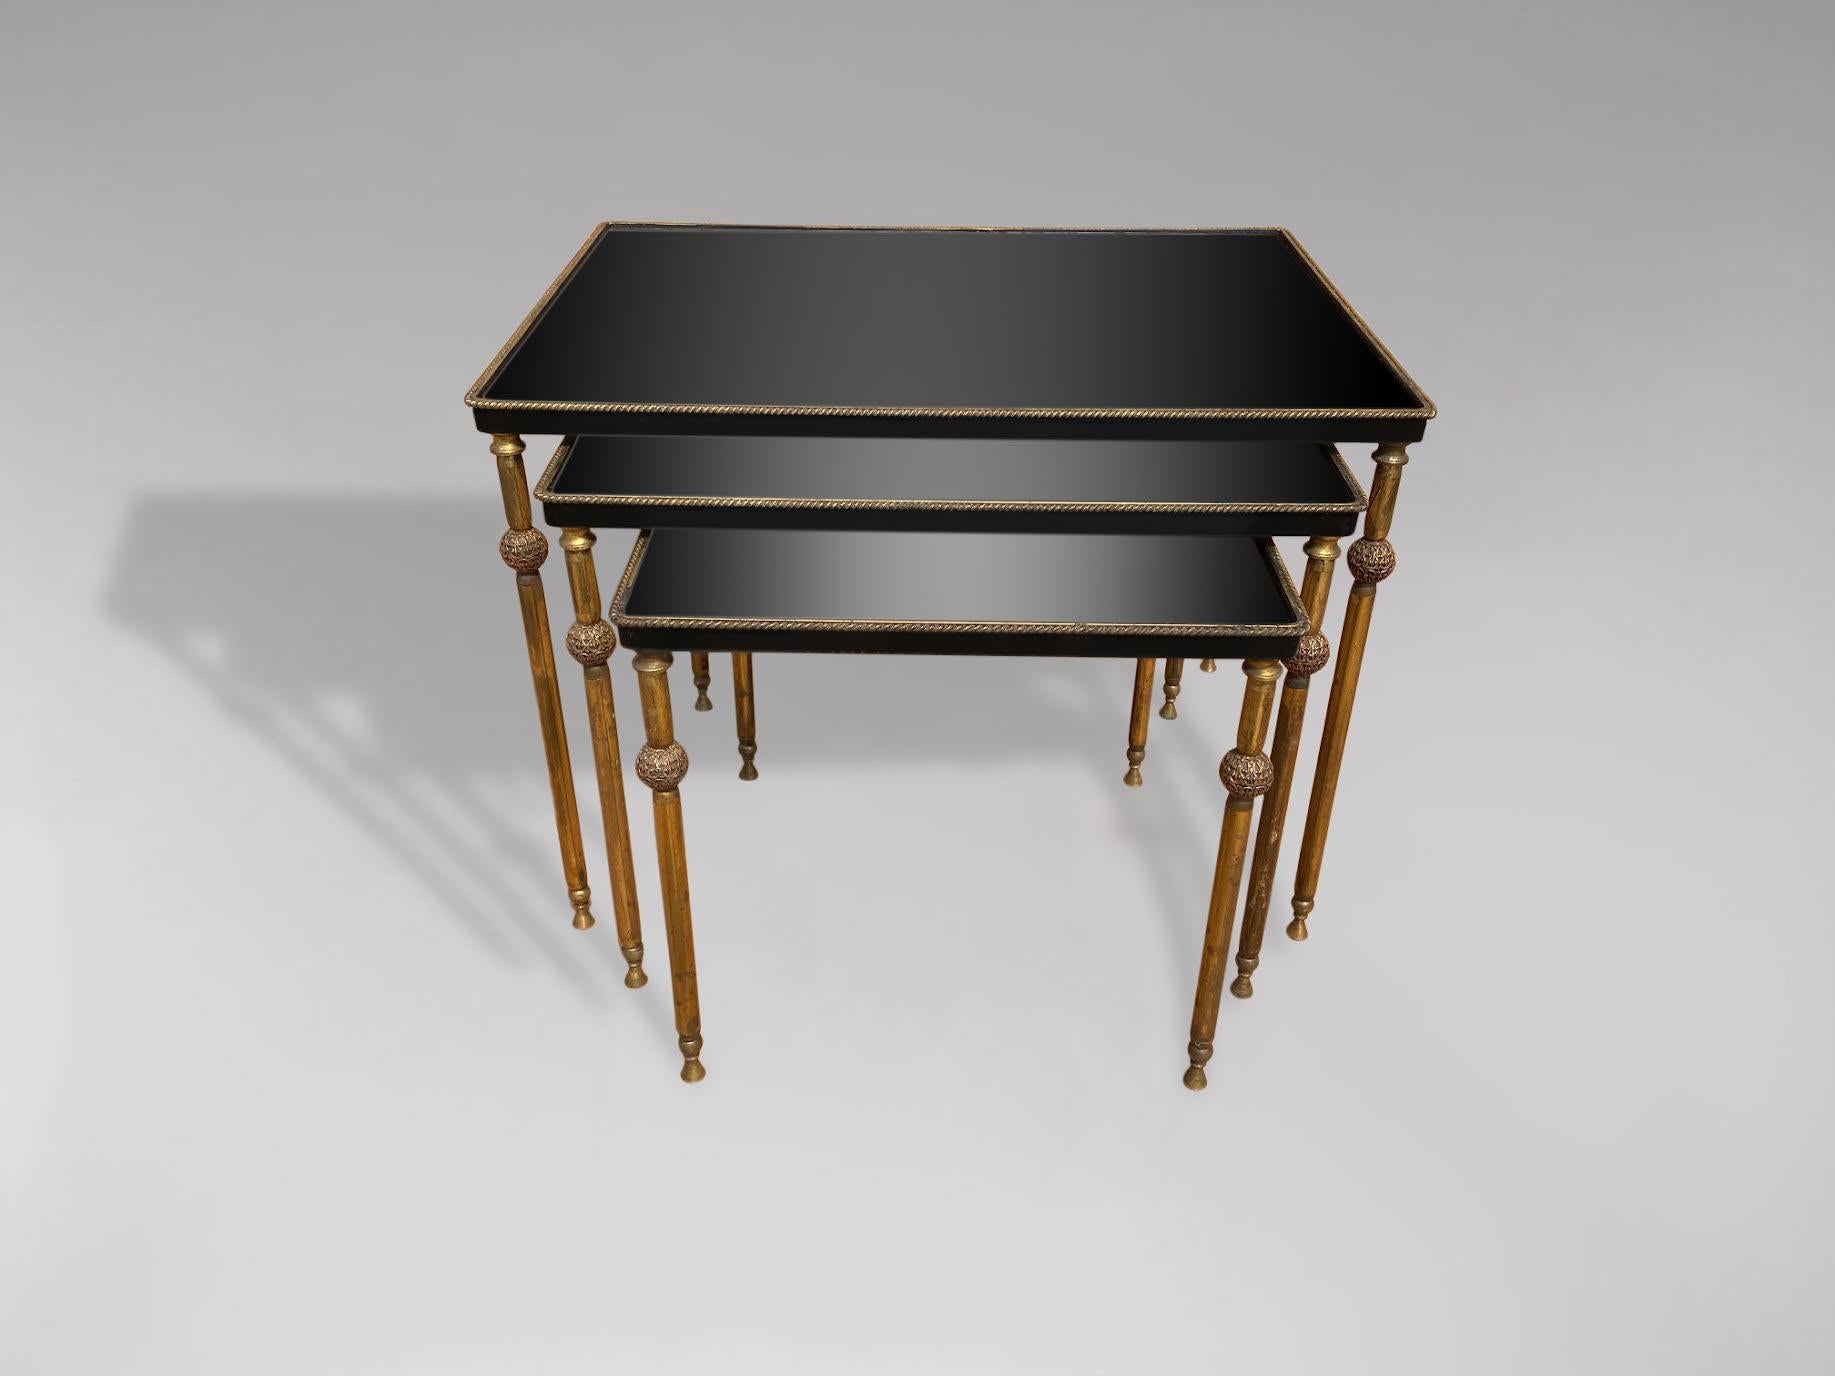 20th Century Nest of 3 Brass Tables with Black Lacquered Mirror Tops In Good Condition In Petworth,West Sussex, GB